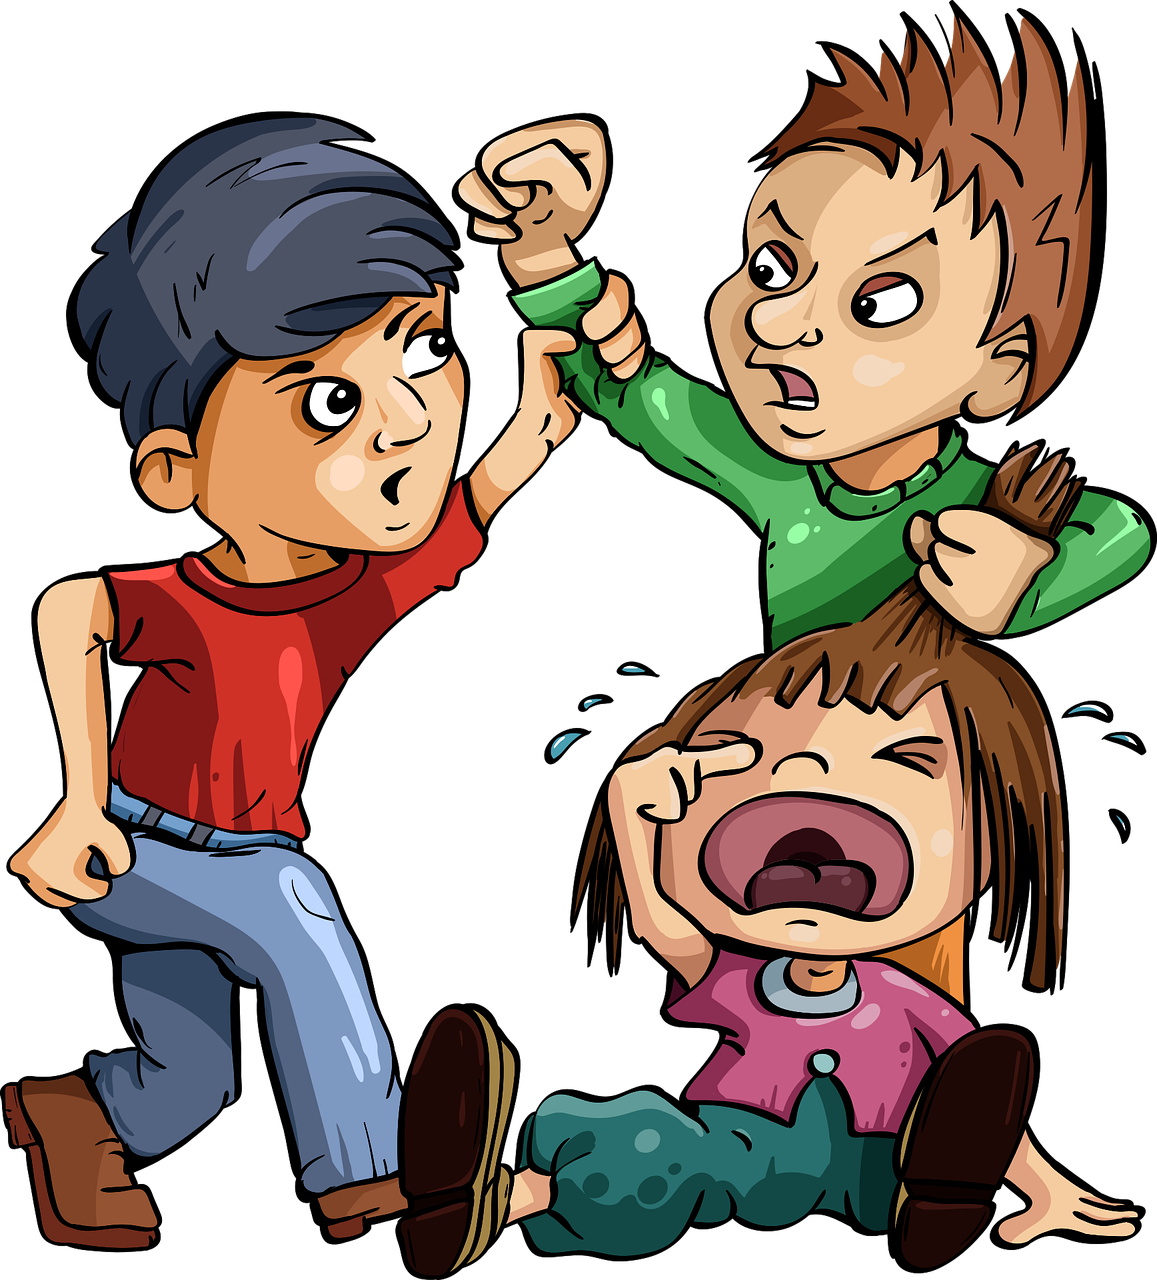 cartoon of kids bullying each other